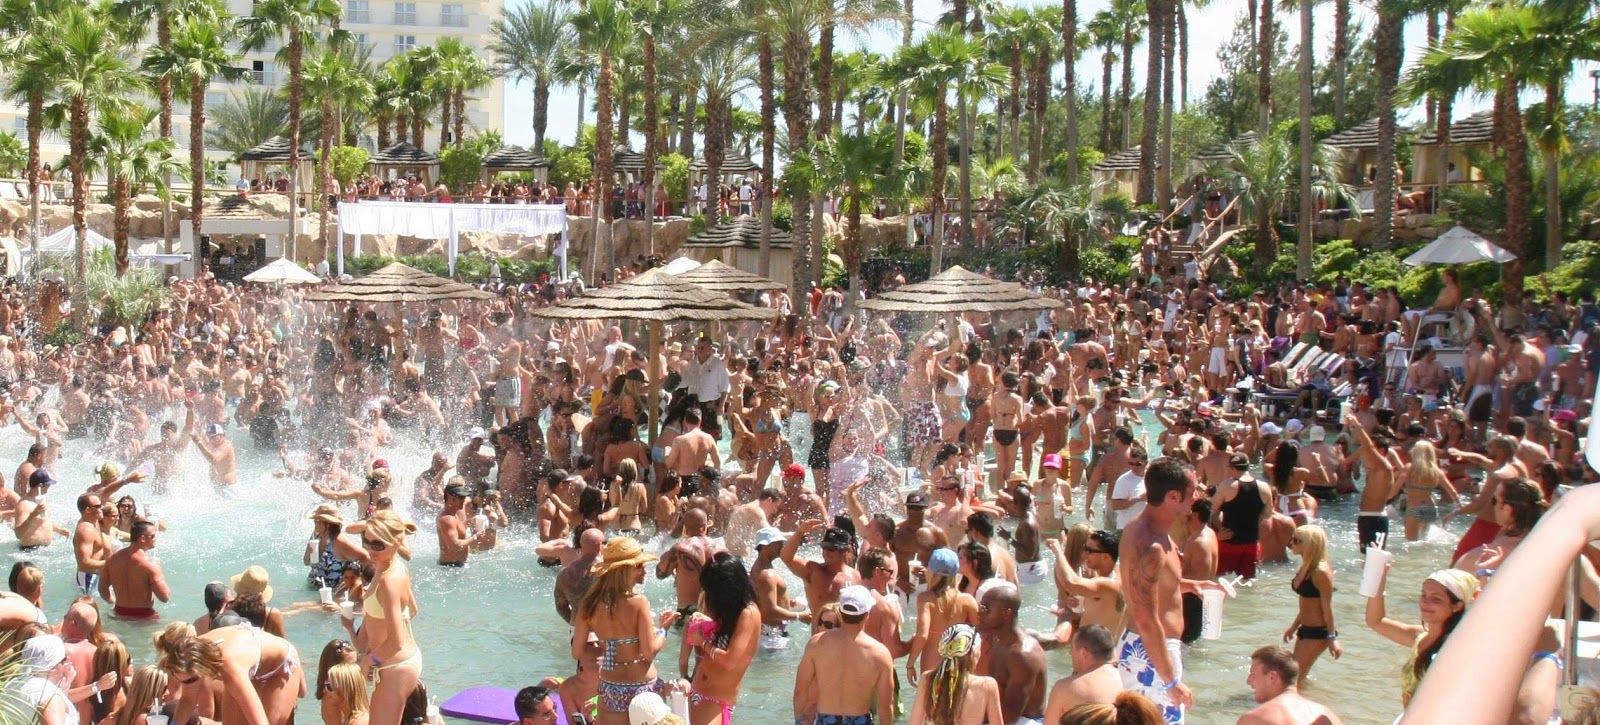 Vegas Pool Party Pictures 